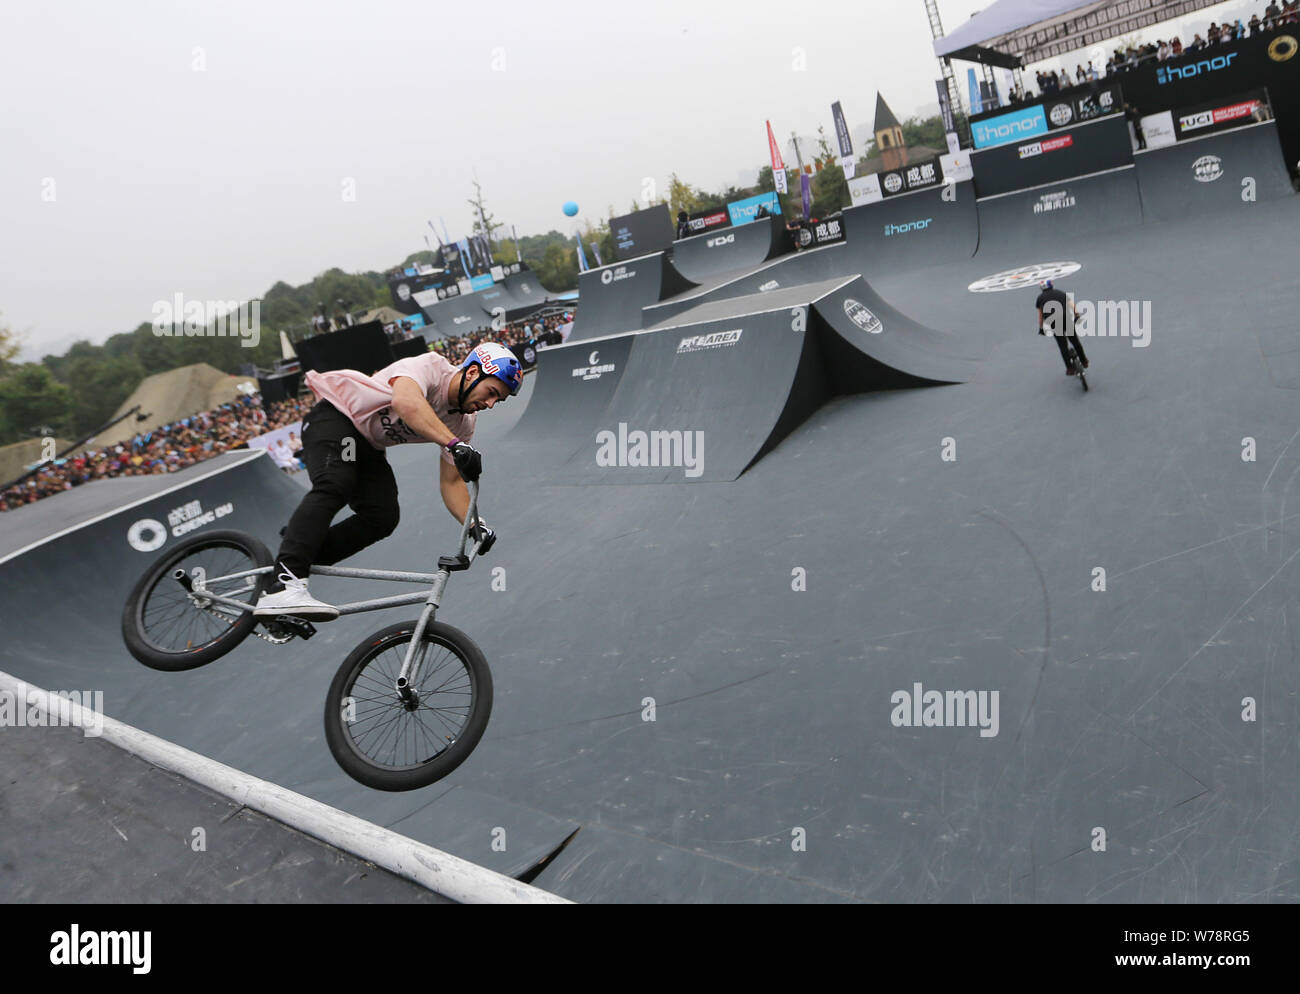 19-year-old French skateboarding star Joseph Garbaccio performs during the FISE World Series Chengdu 2017 in Chengdu city, southwest China's Sichuan p Stock Photo